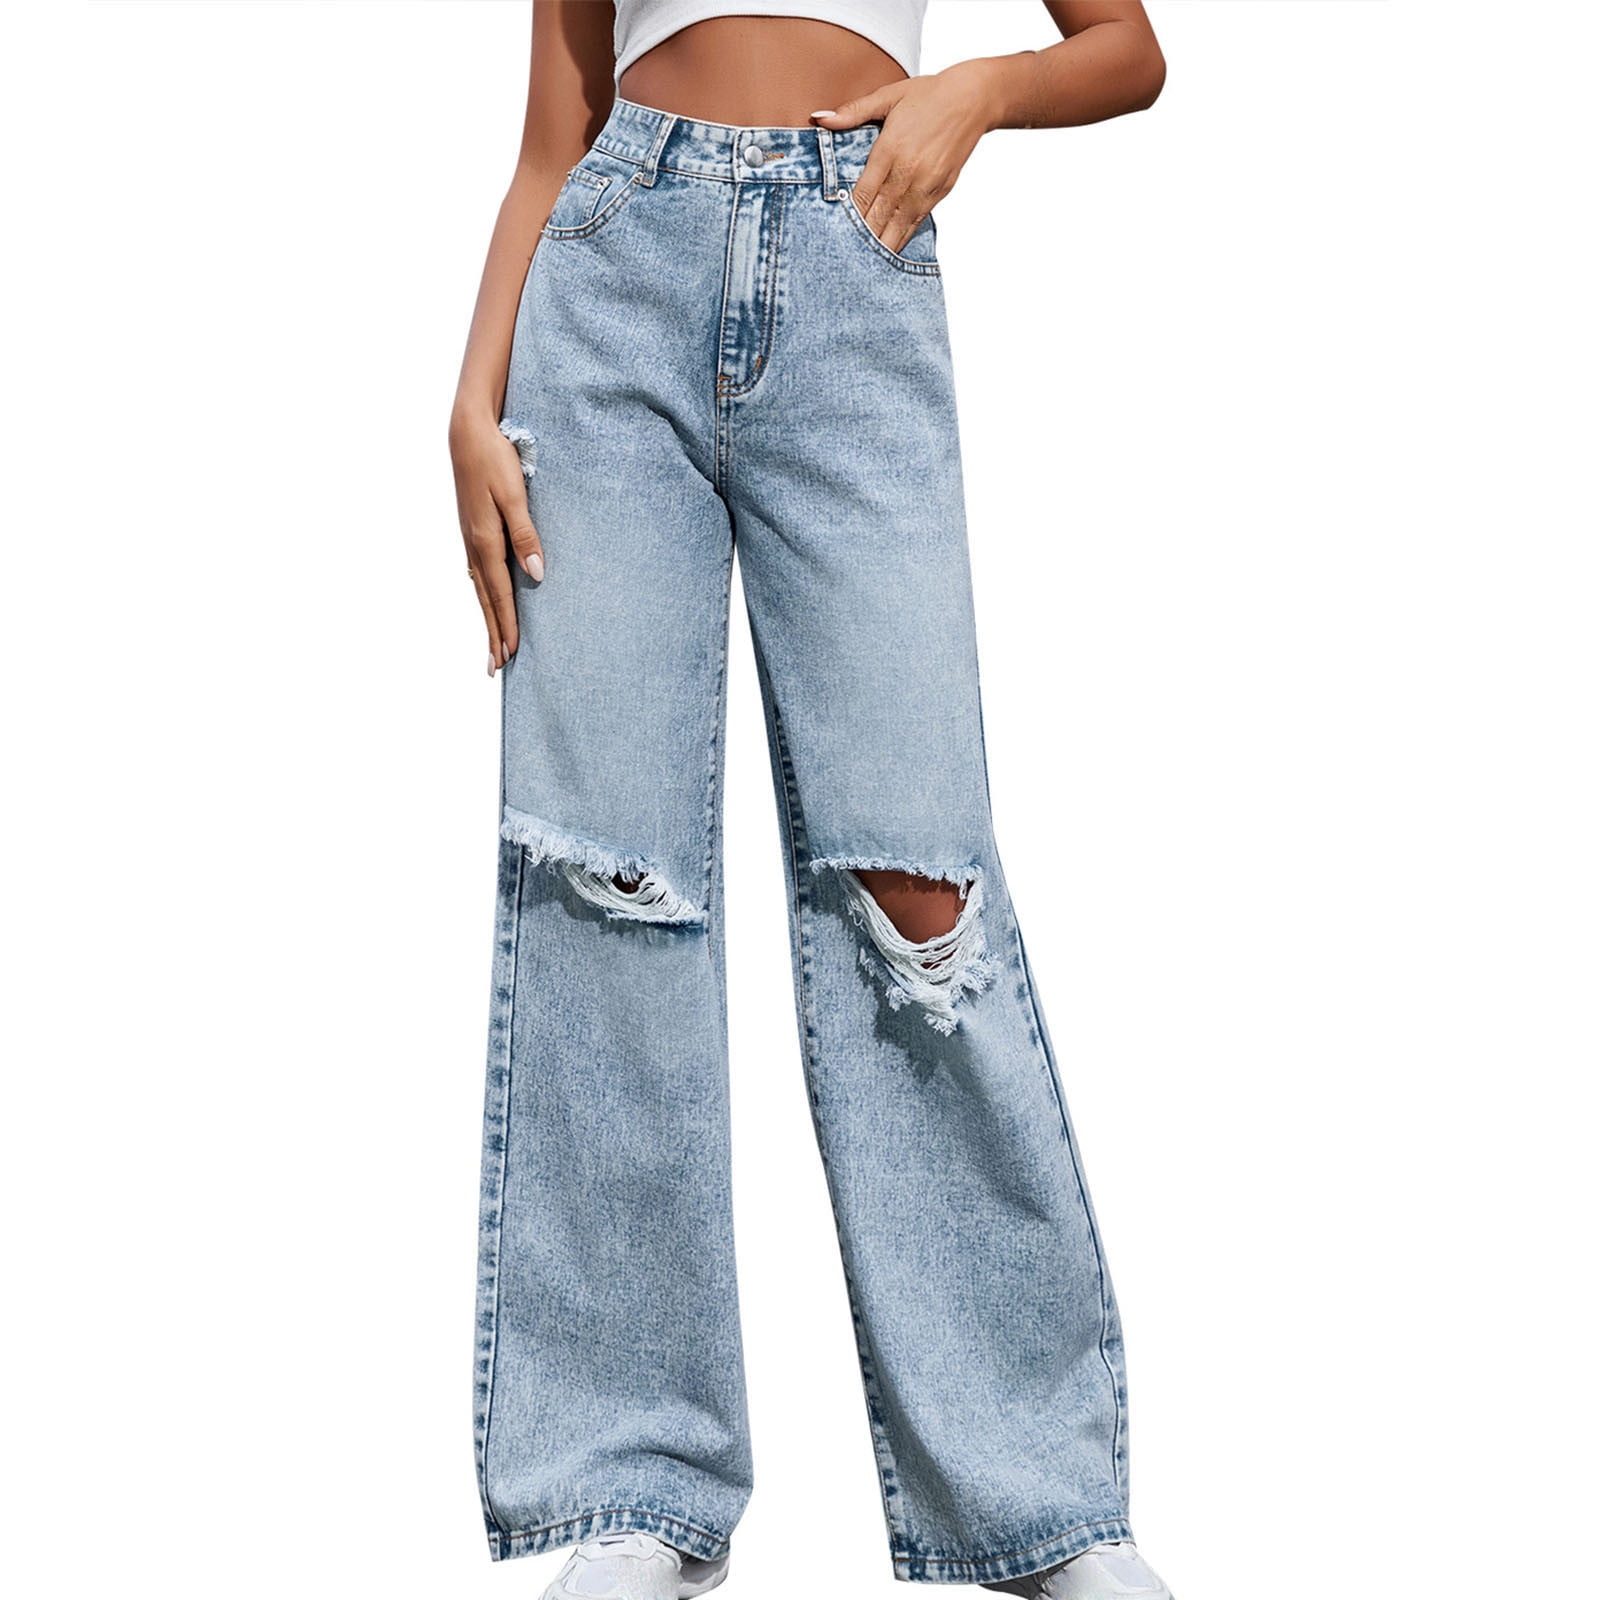 Buy Women's Loose Mom Jeans Casual Wide Leg Straight Jeans Classic High  Waist Boyfriend Denim Pants, Blue-2, Large at